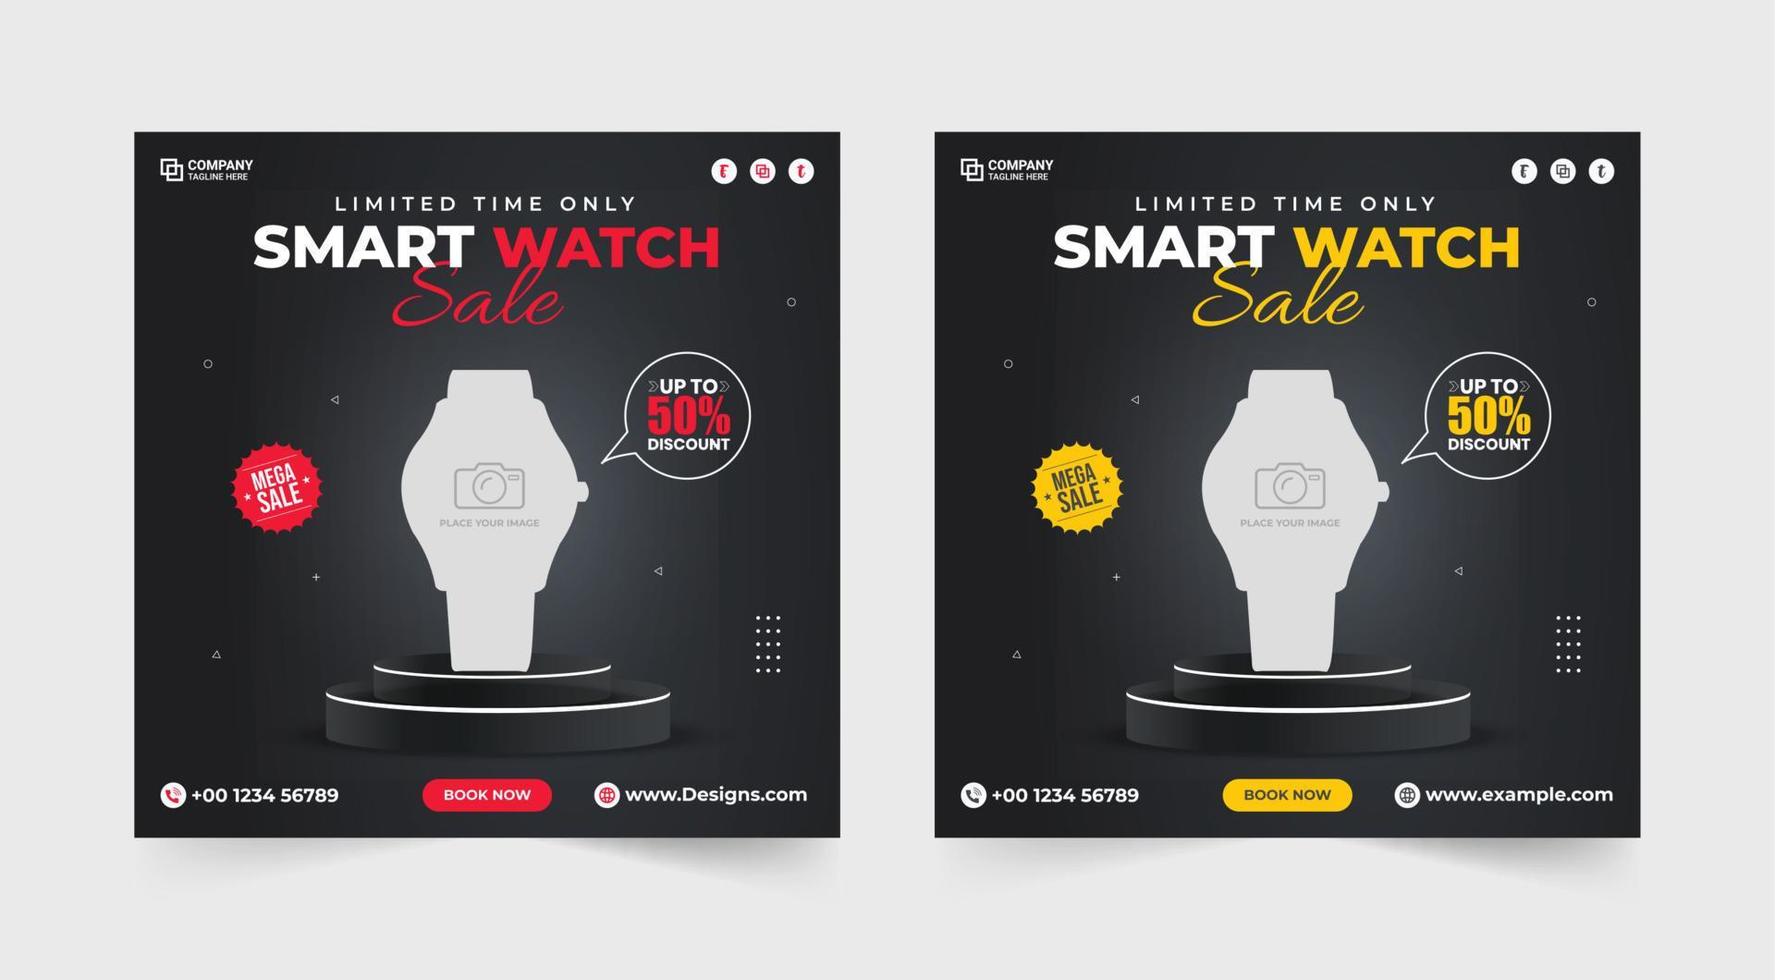 Smart watch product post. Smart watch social media post. Limited time offer smart watch mega sale. Wrist Watch sale discount template. Clock business banner. Product sale and promotion. vector